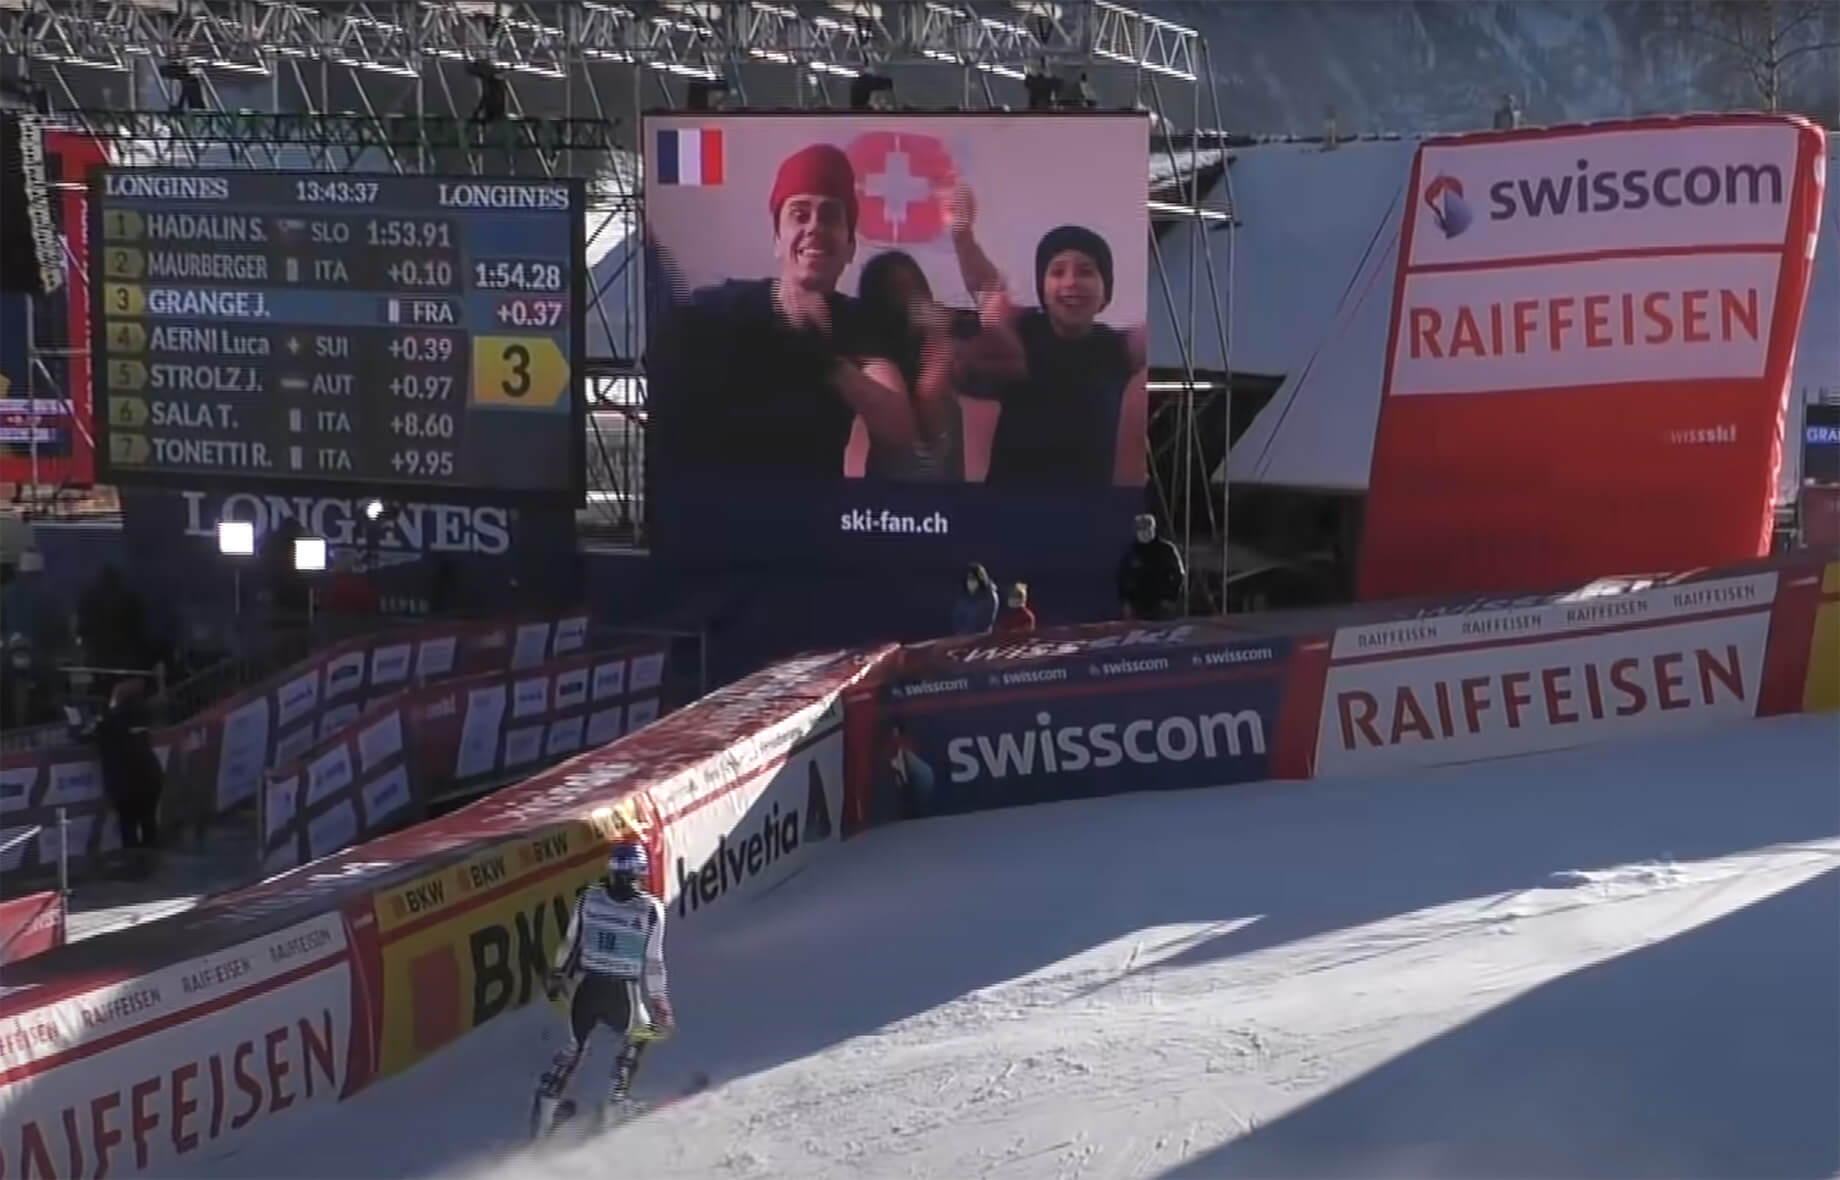 ski-fan.ch: Bringing fans virtually to the race track